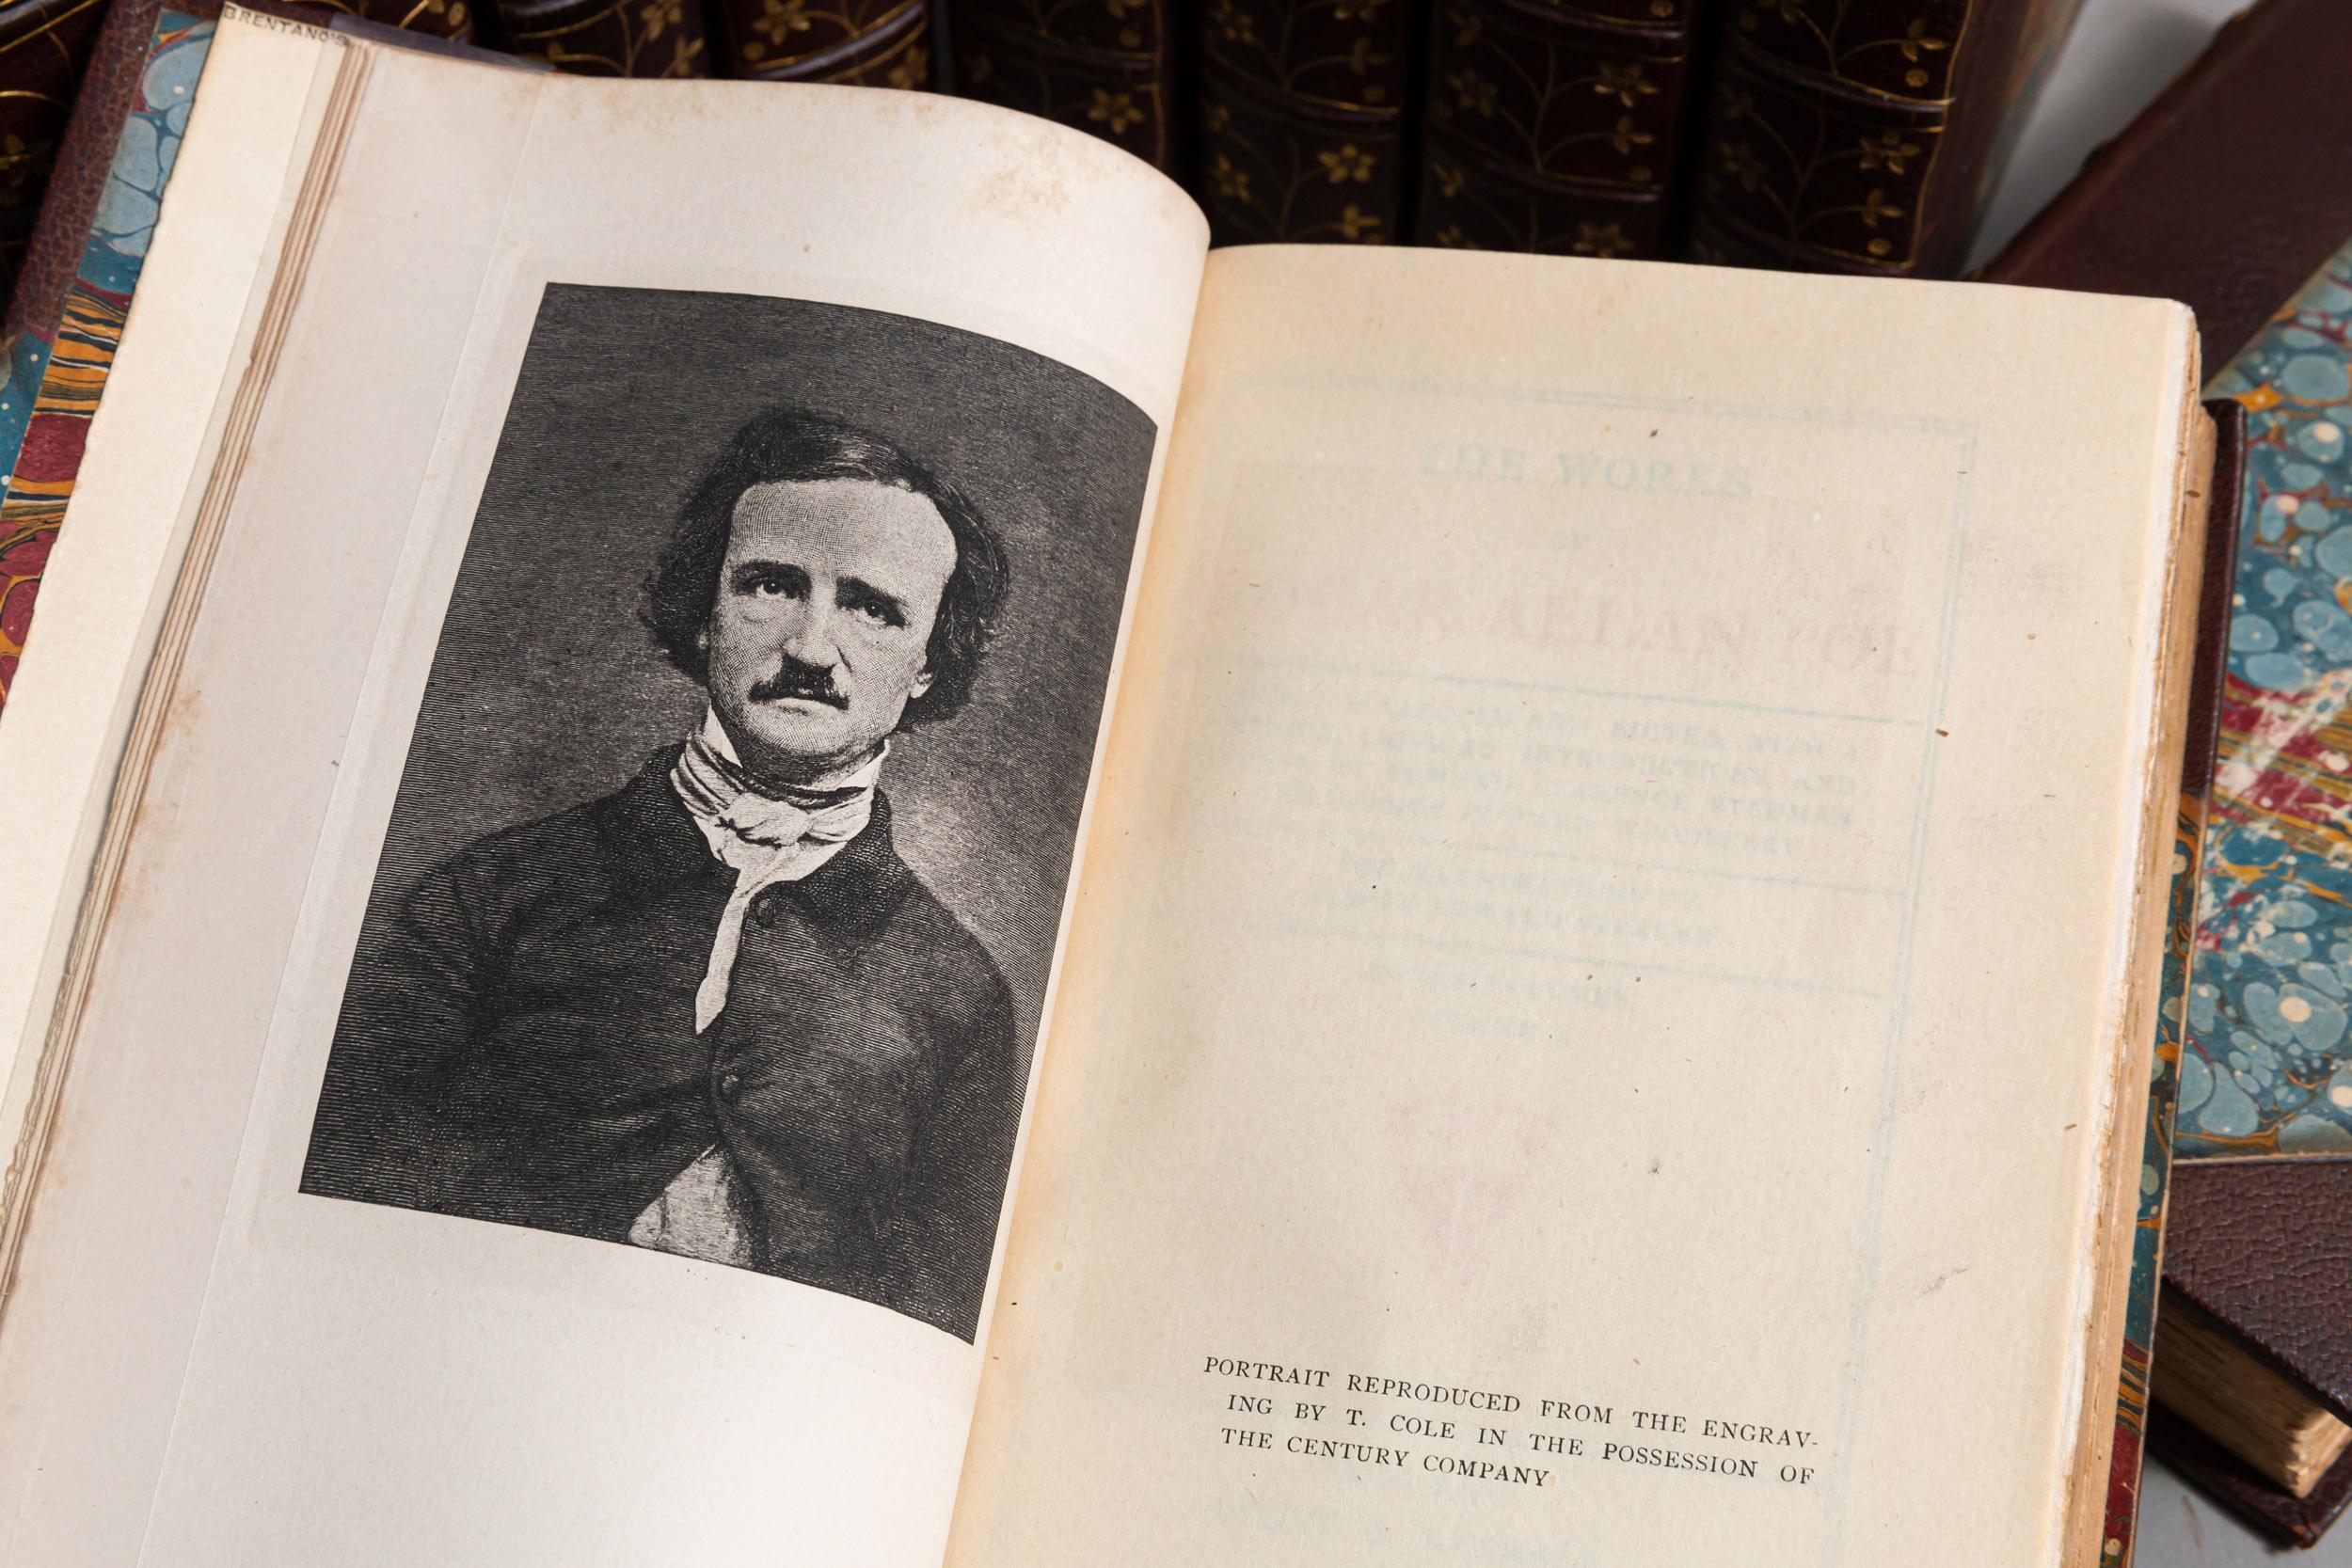 10 Volumes.Edgar Allan Poe. The Works. bound in 3/4 brown Morocco by Blackwell, marbled endpapers, raised bands, top edges gilt, raised bands, ornate gilt on spines, illustrated. Published: Chicago: Stone & Kimball
1895. Beautiful set.